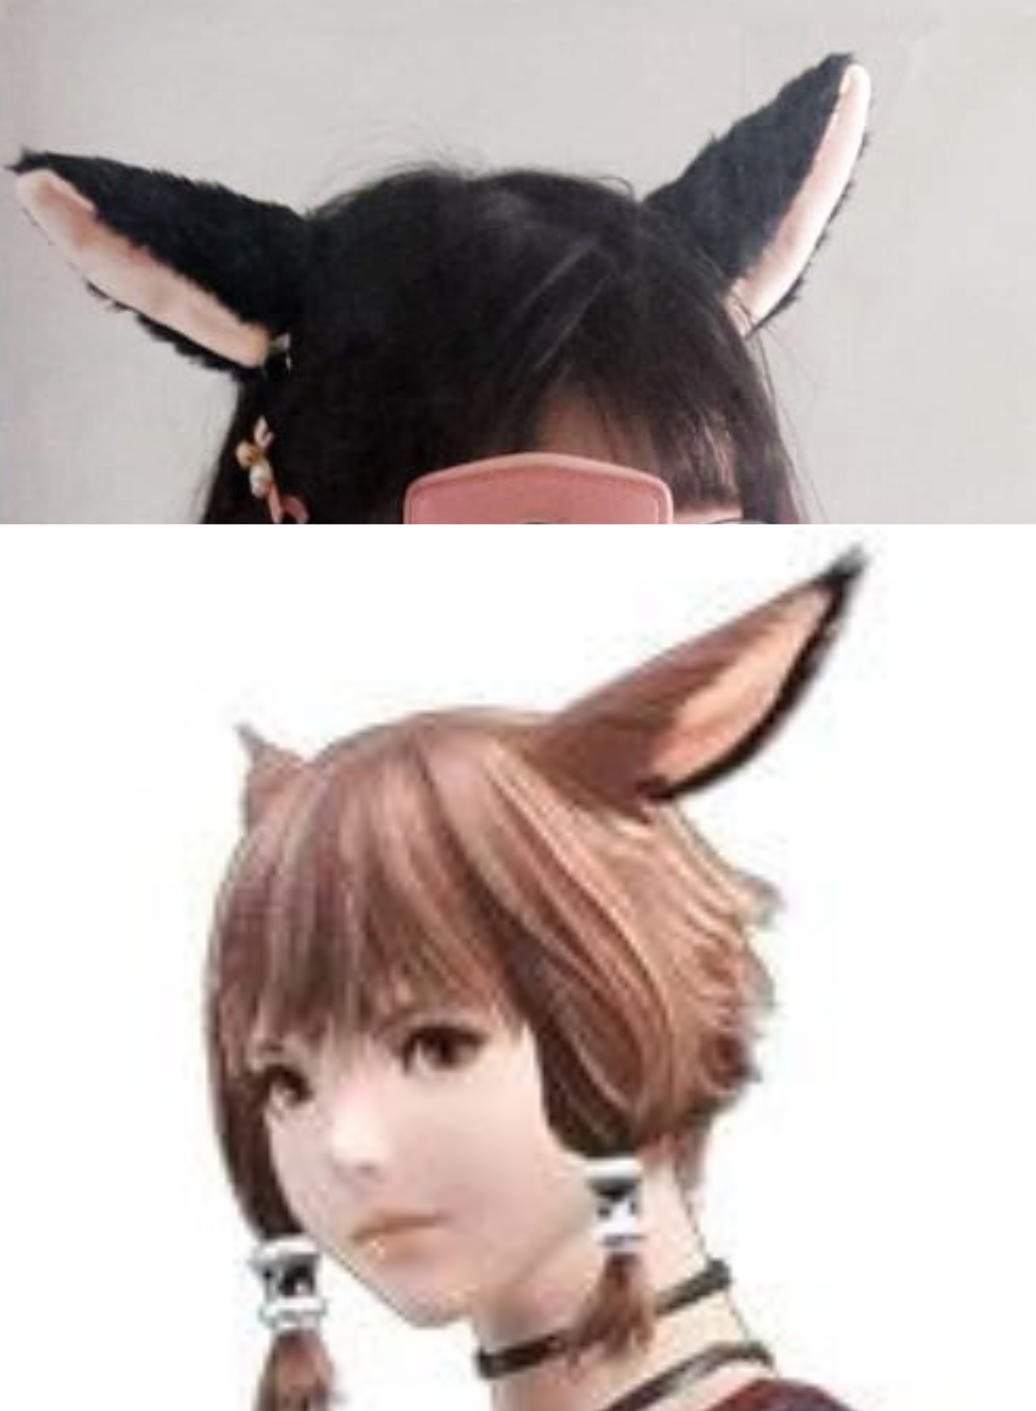 Miqo'te (cute ass cat girl) Snapchats videoed from the weekend